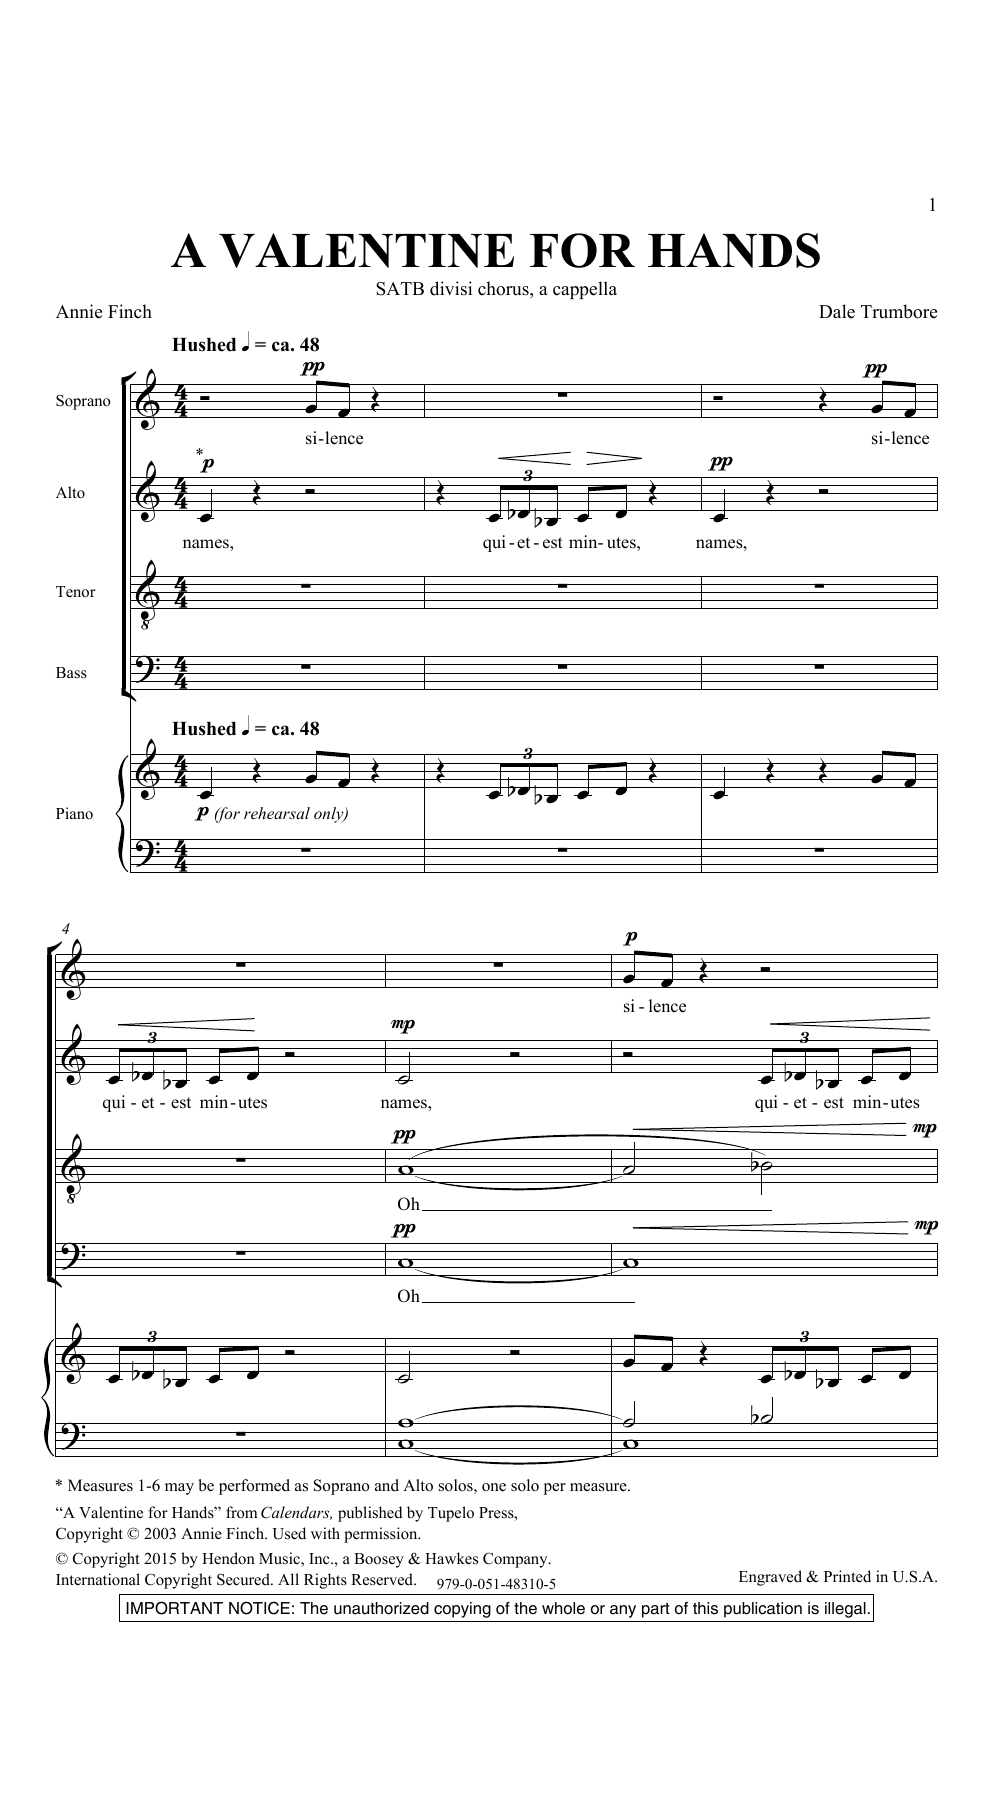 Download Dale Trumbore A Valentine For Hands Sheet Music